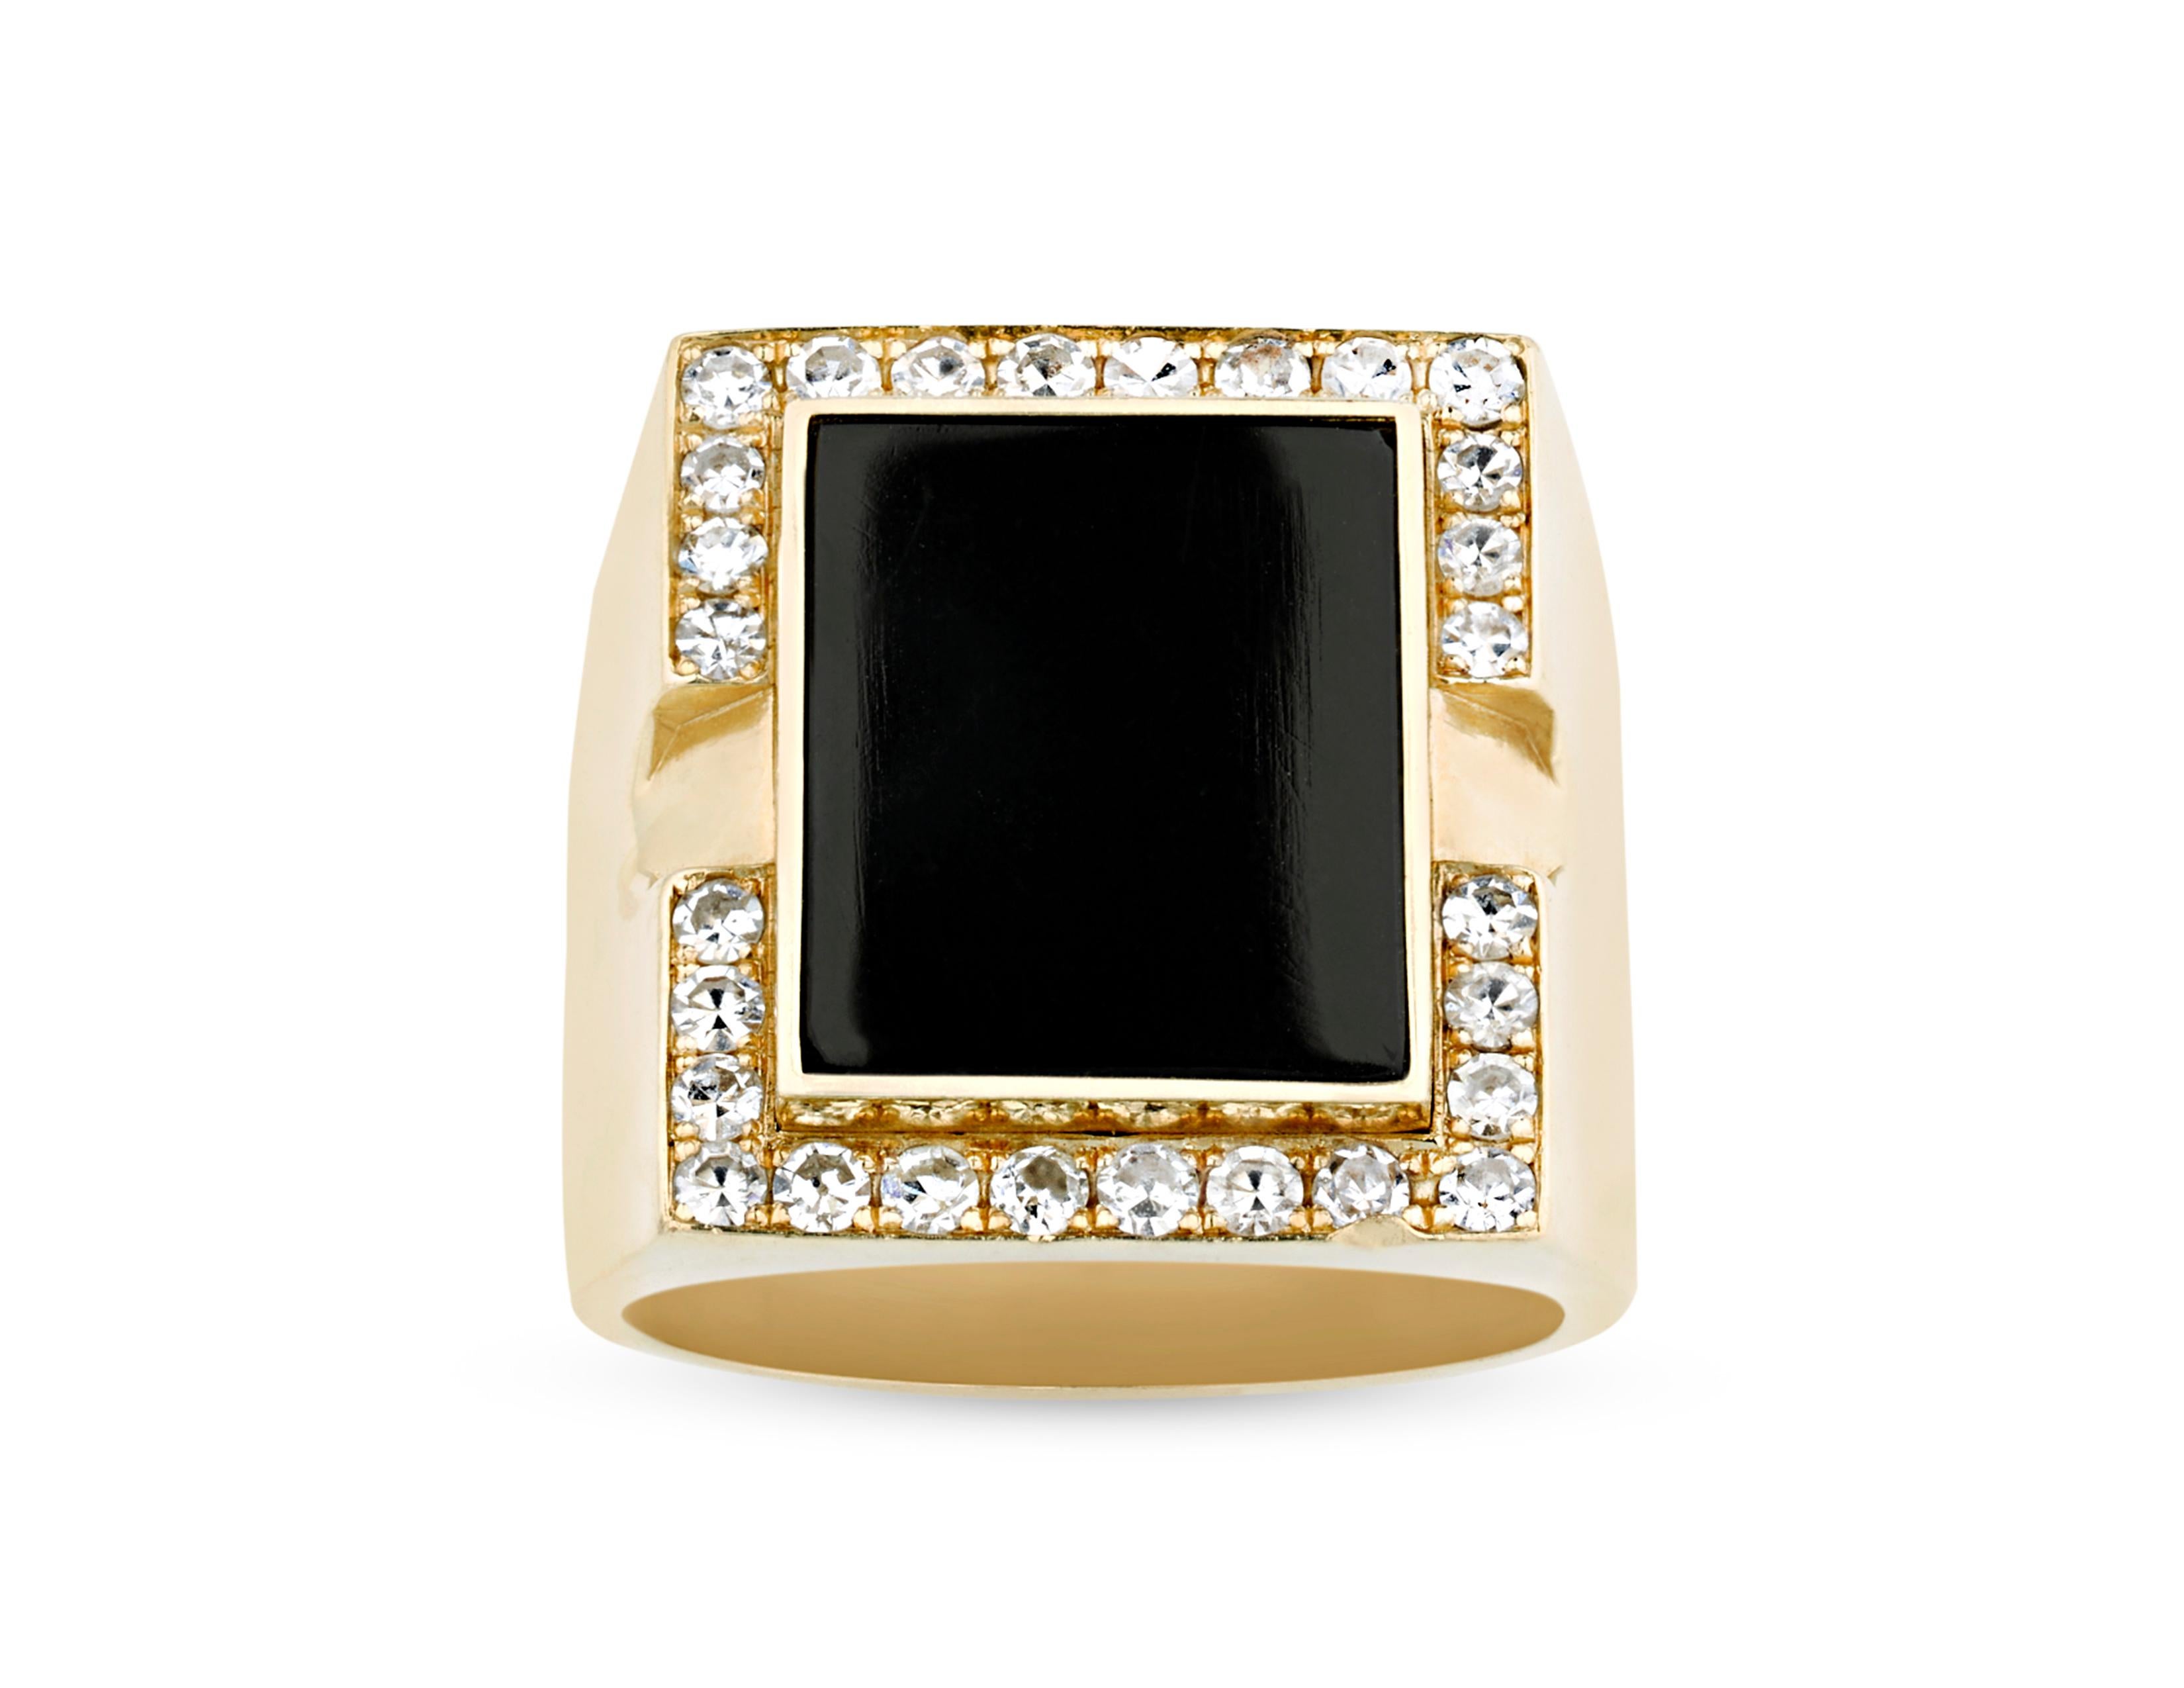 This ring was once owned and worn by one of the most celebrated cultural icons of the 20th century, Elvis Presley. A stunning specimen of onyx is set at its center, and its rich, black hue is beautifully complemented by the 28 single-cut diamonds